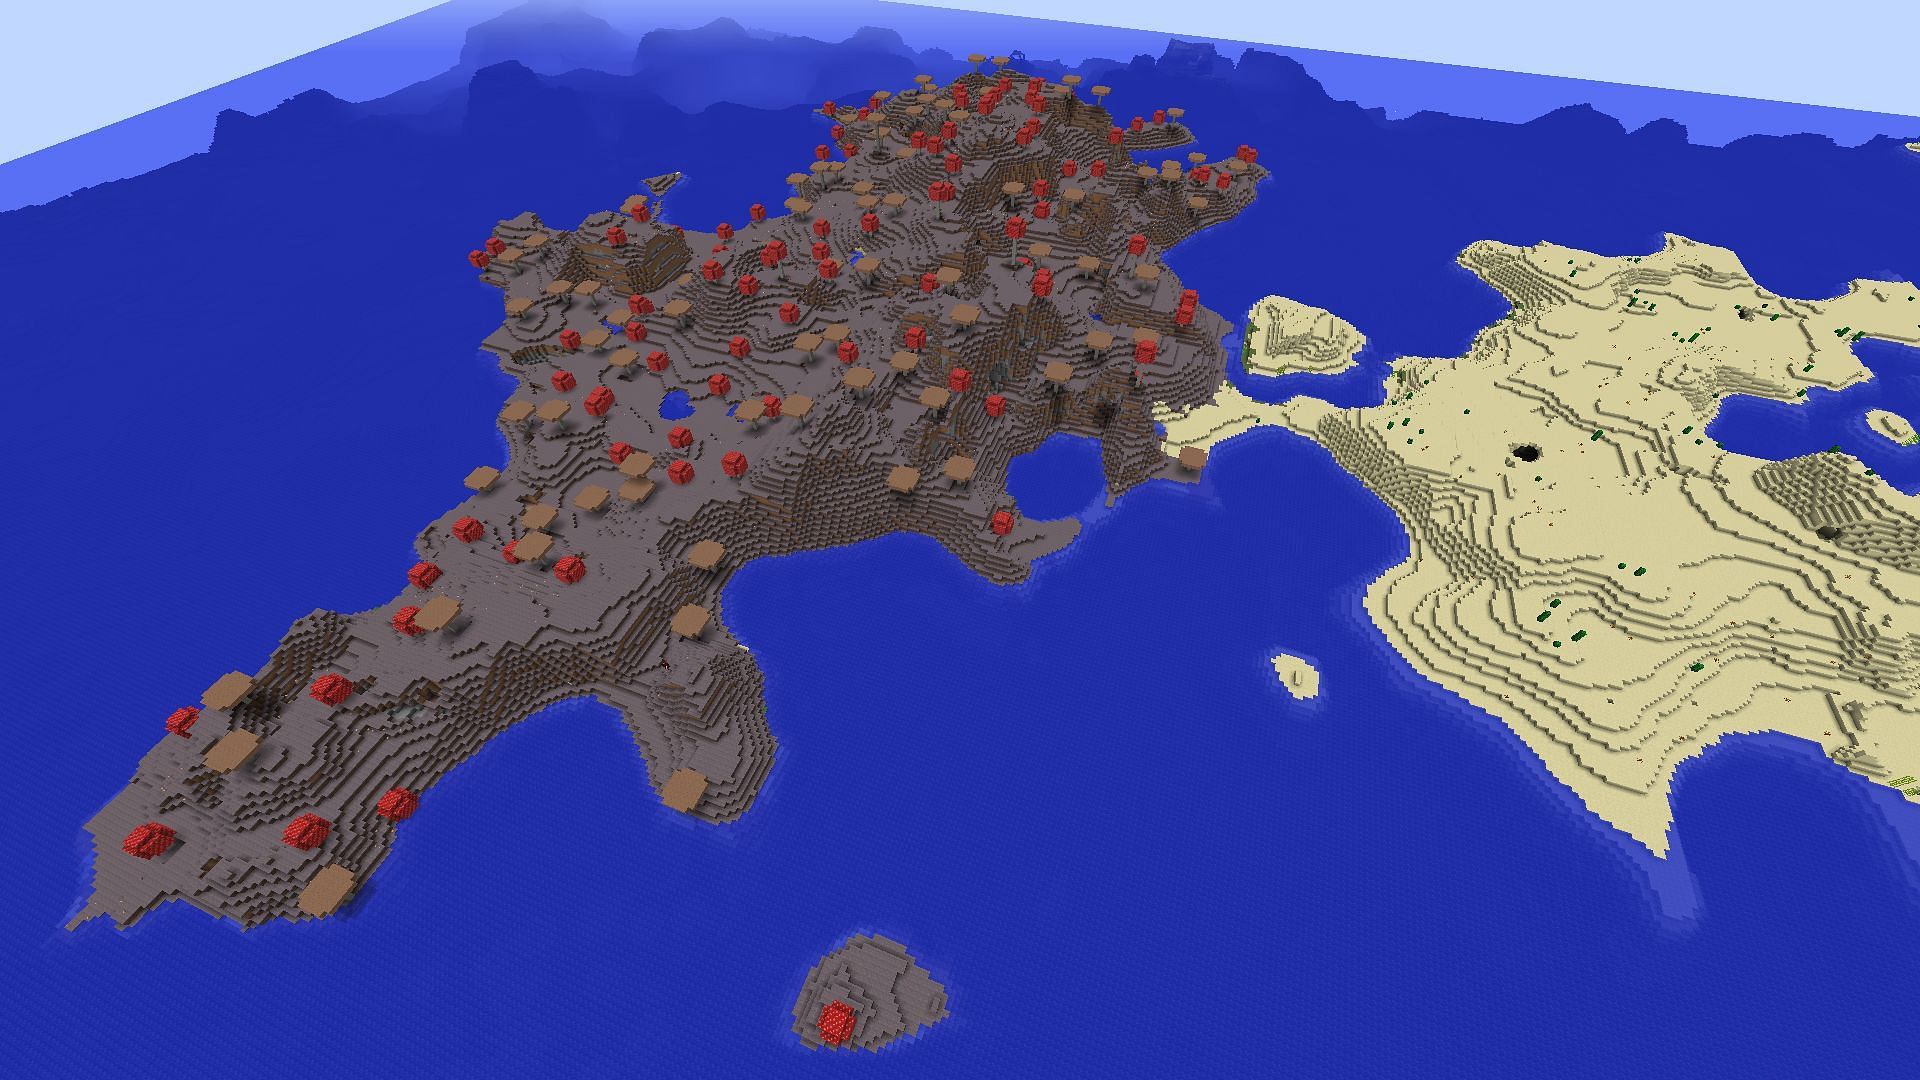 A moderately sized mushroom biome as seen from above (Image via Minecraft)